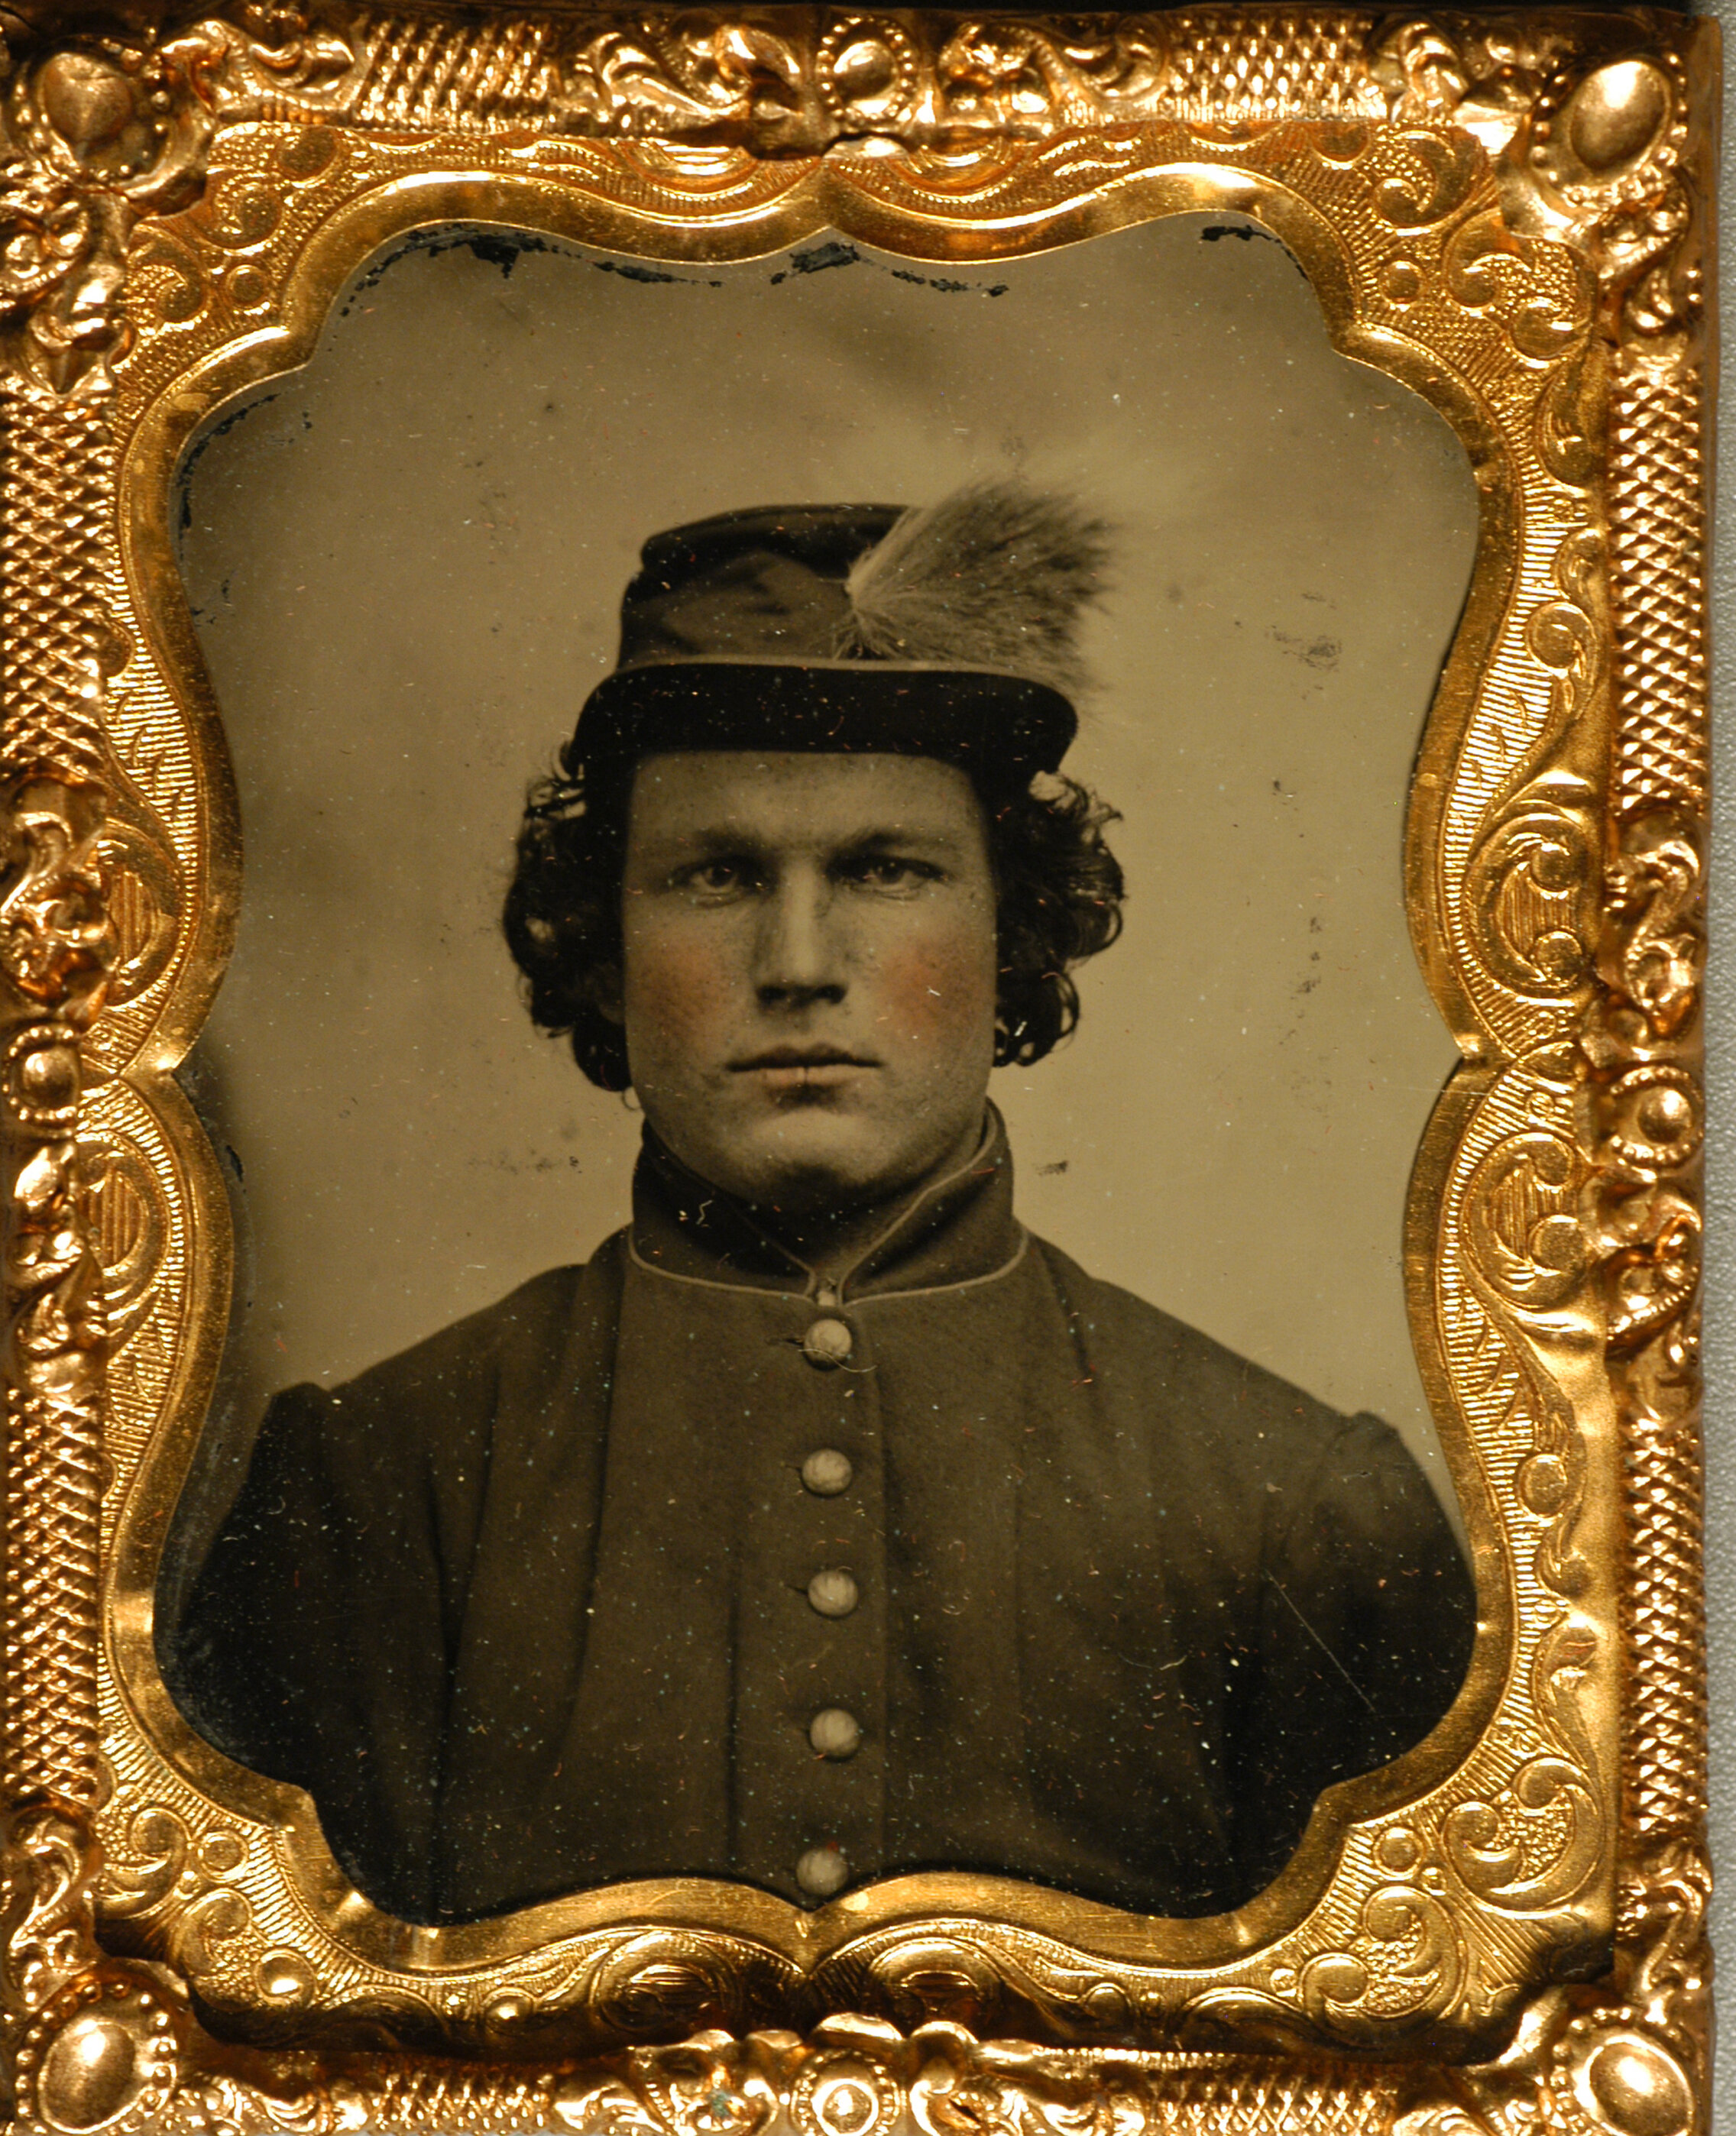 A soldier of the Pennsylvania Bucktails 